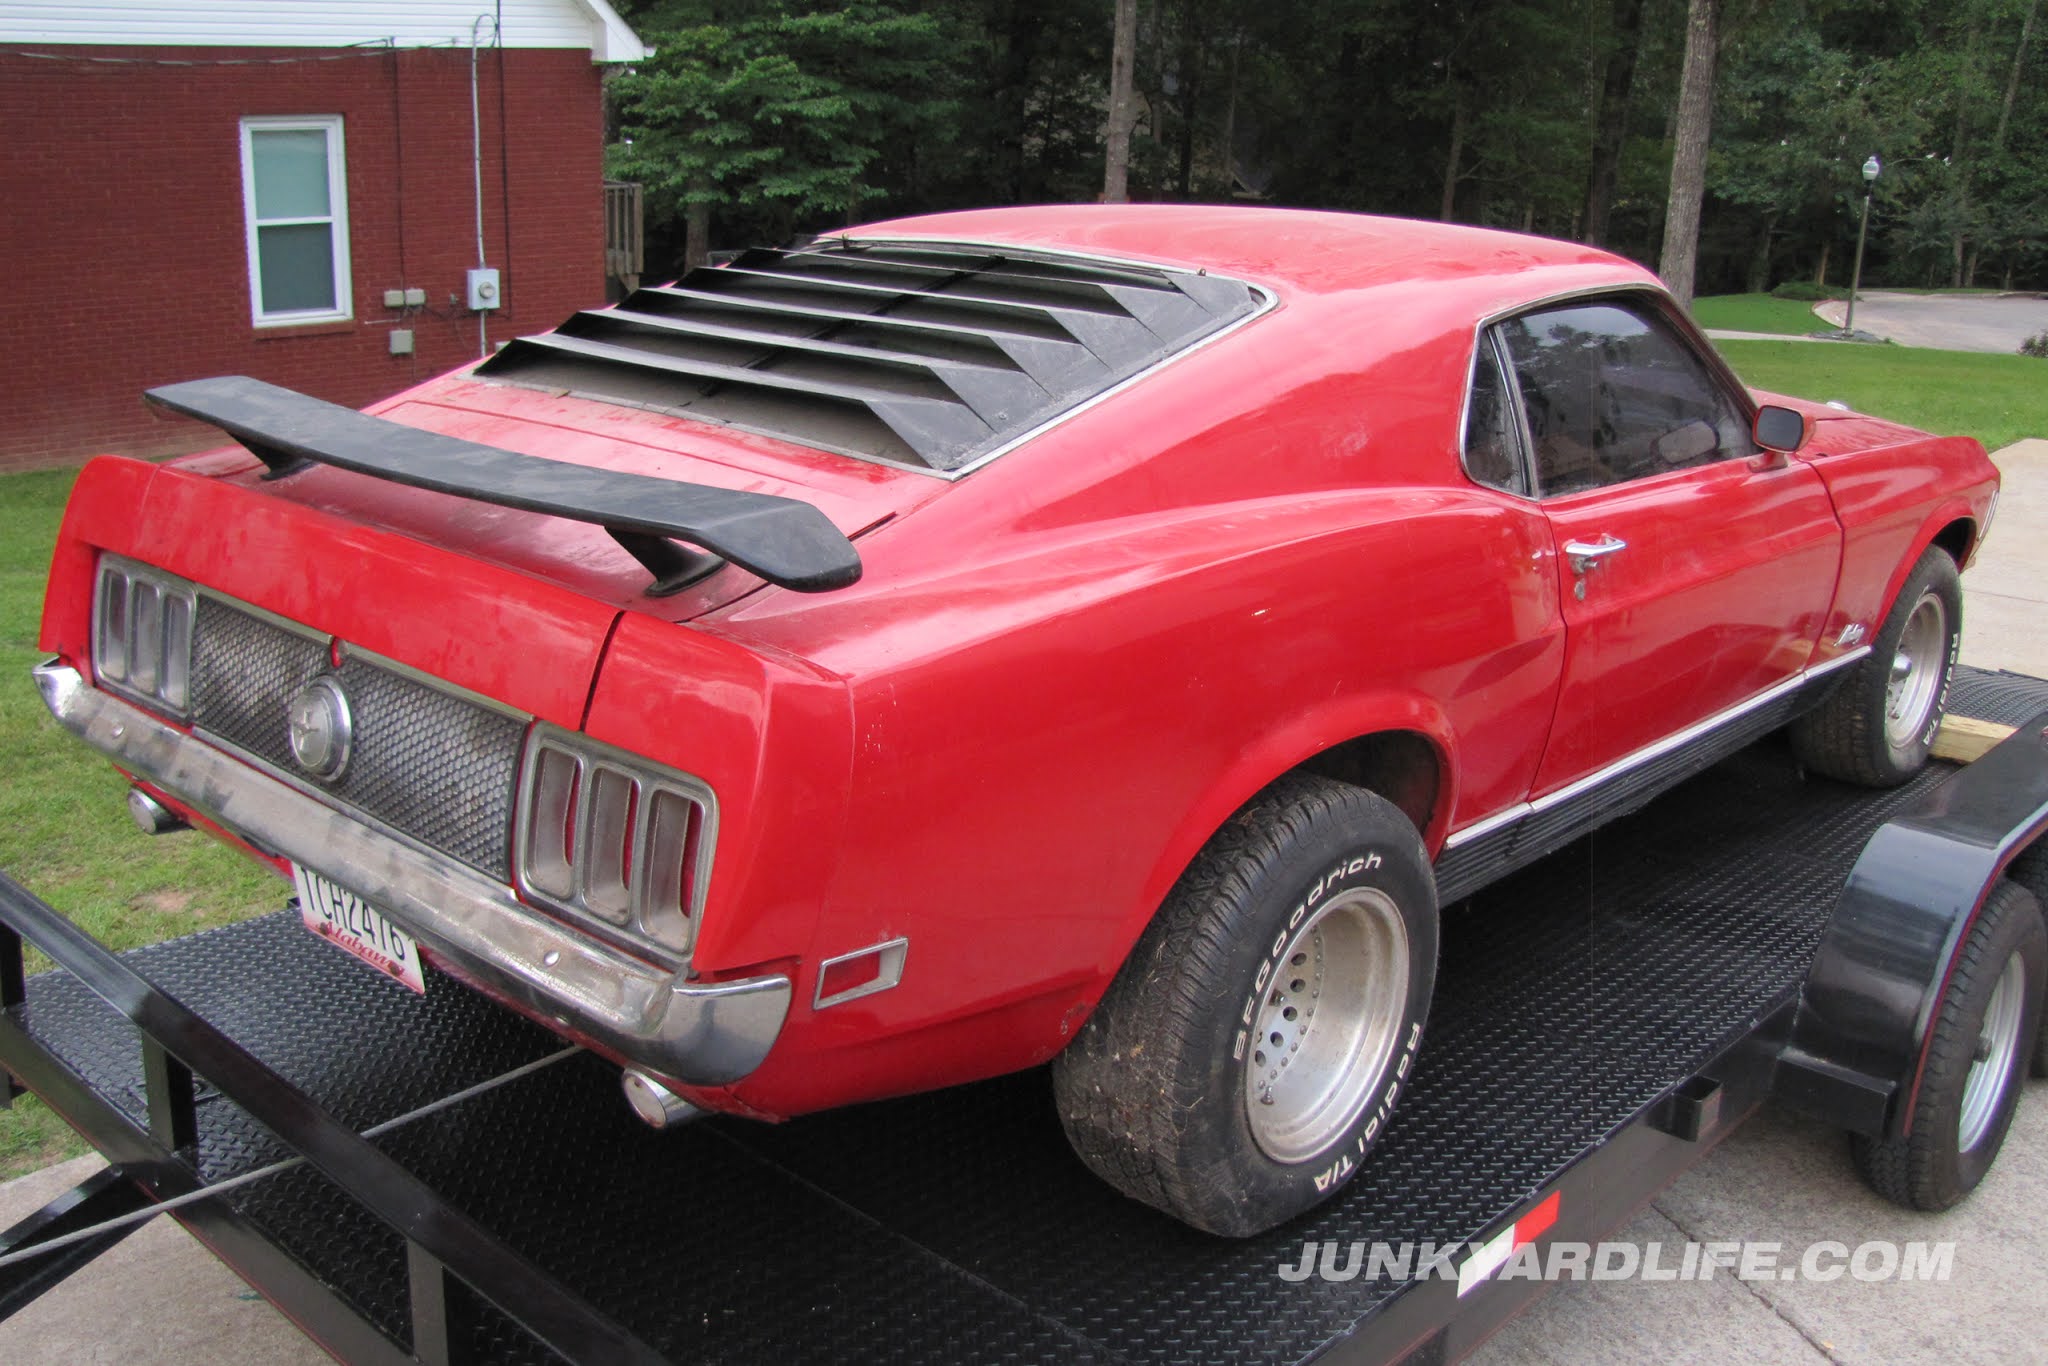 Rally Zij zijn Complex Junkyard Life: Classic Cars, Muscle Cars, Barn finds, Hot rods and part  news: Hunting the perfect 1970 Mustang Mach 1 project